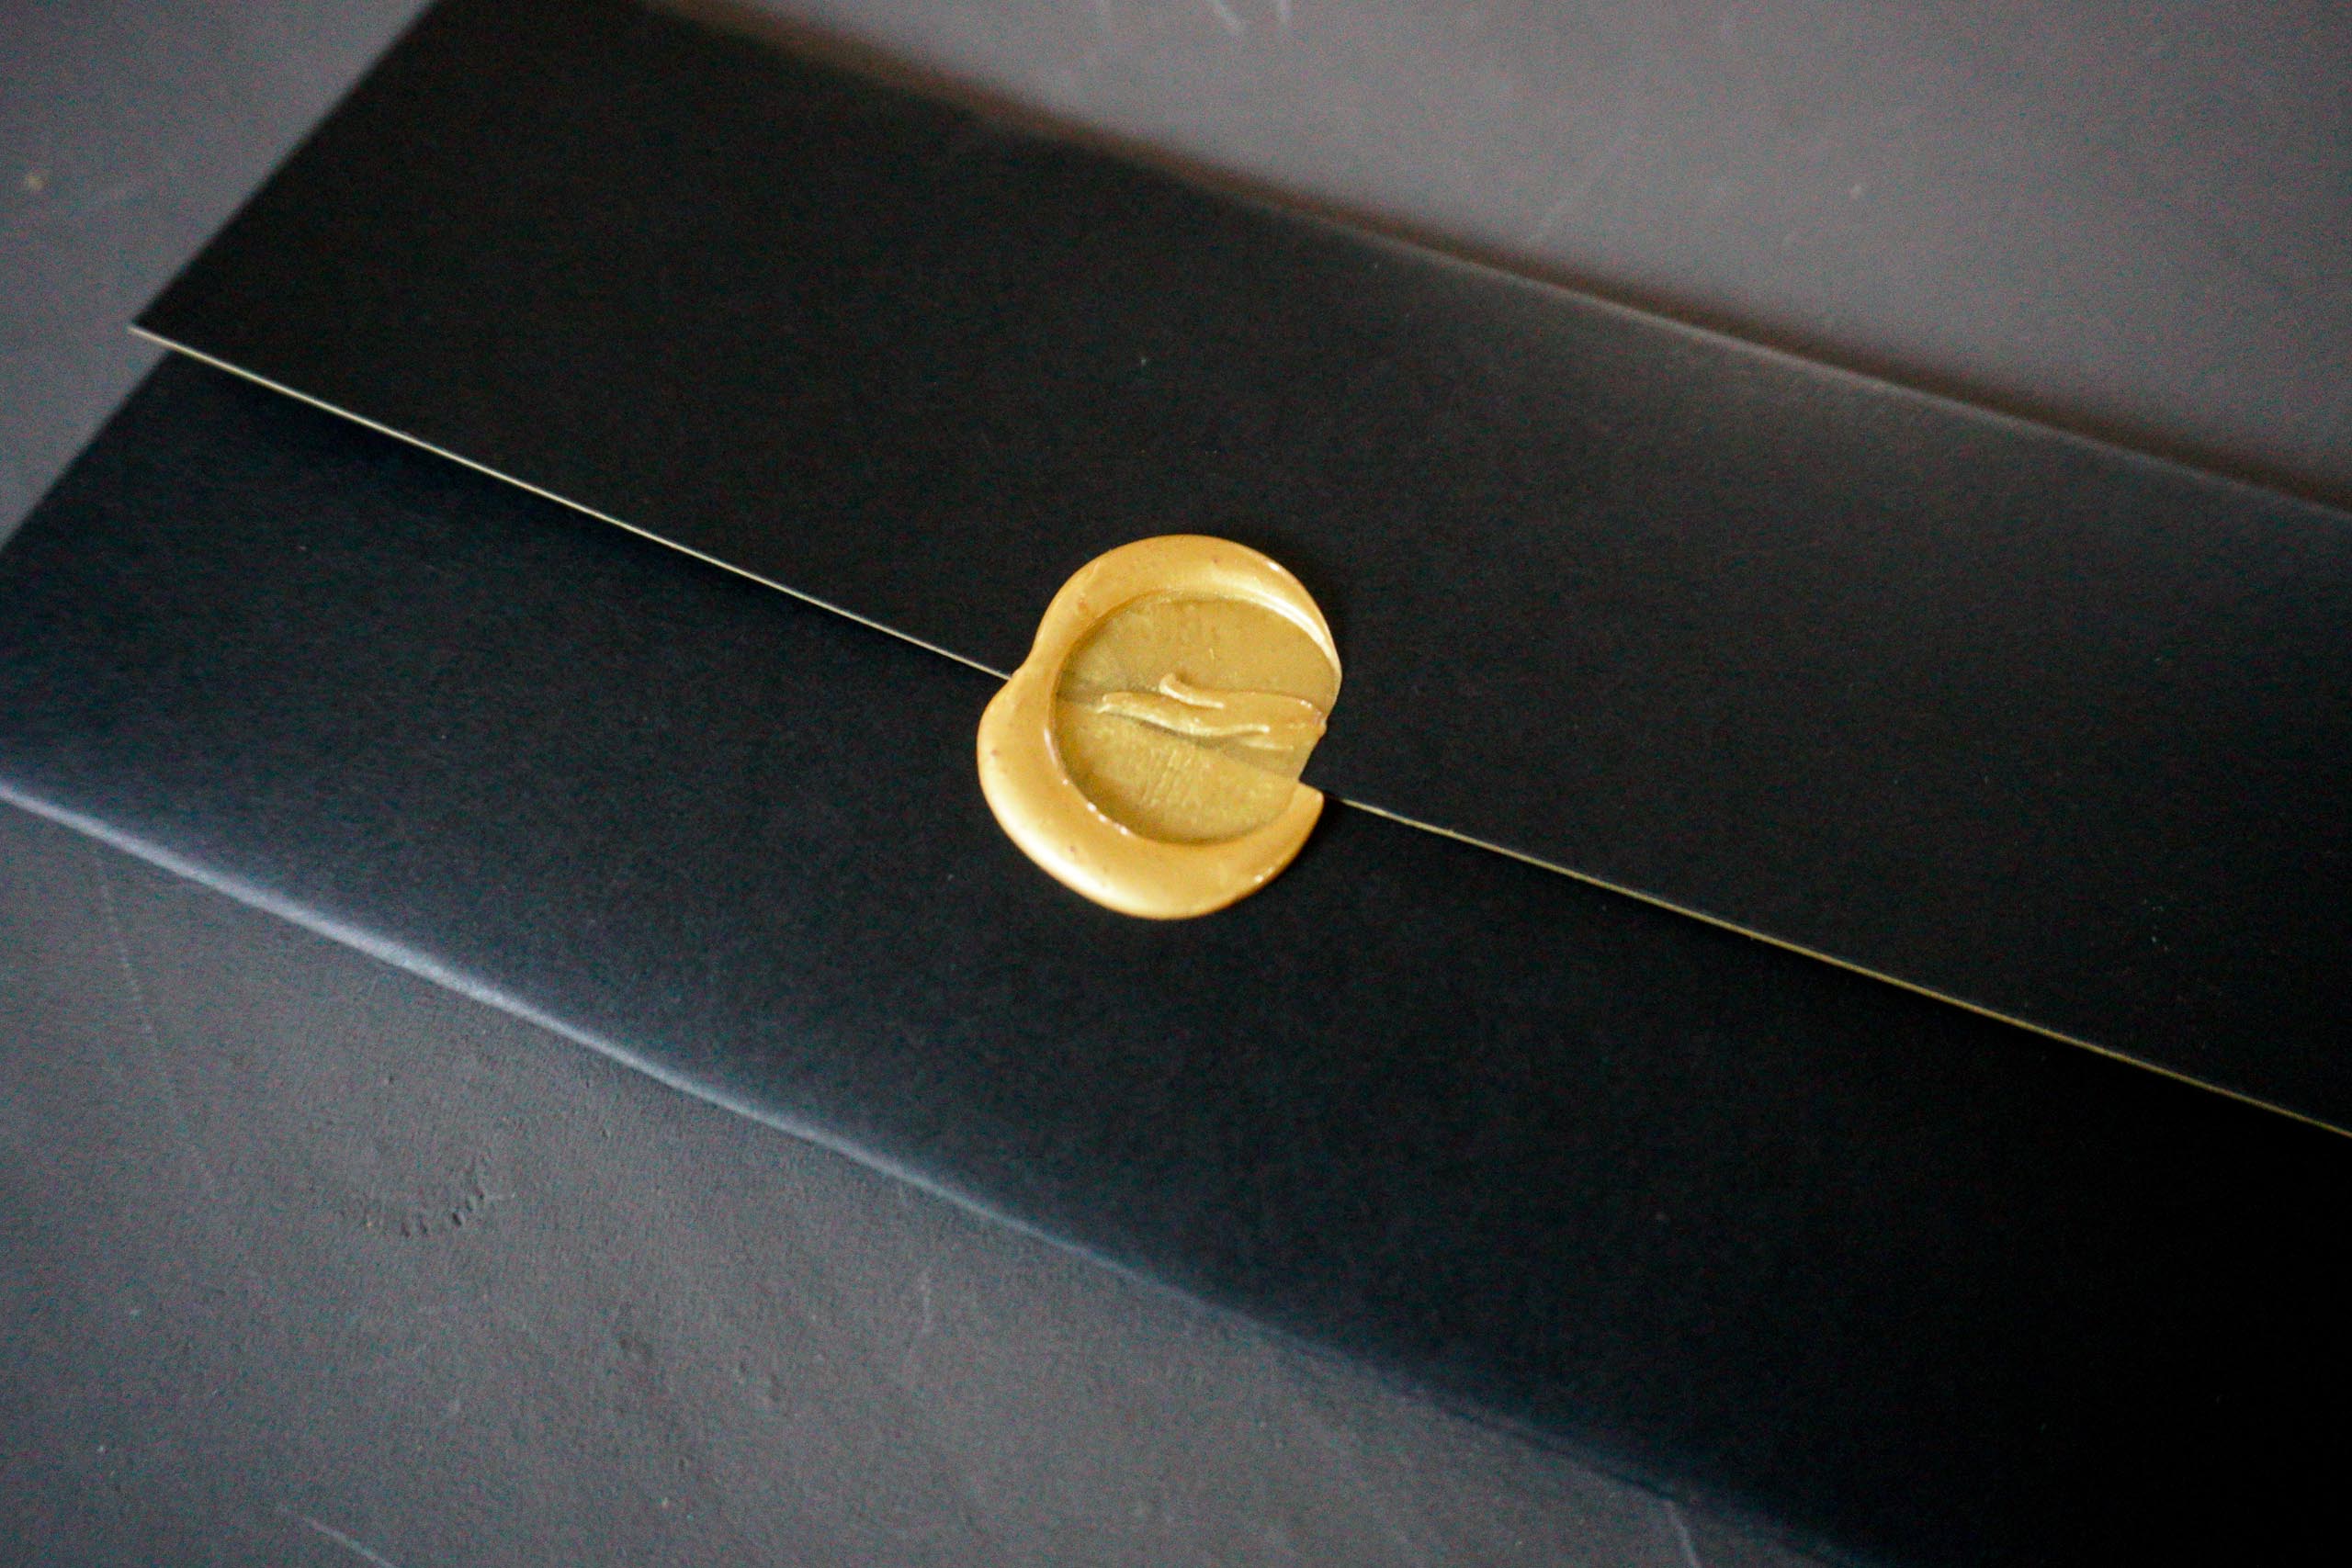 and a gold wax-seal of their logo